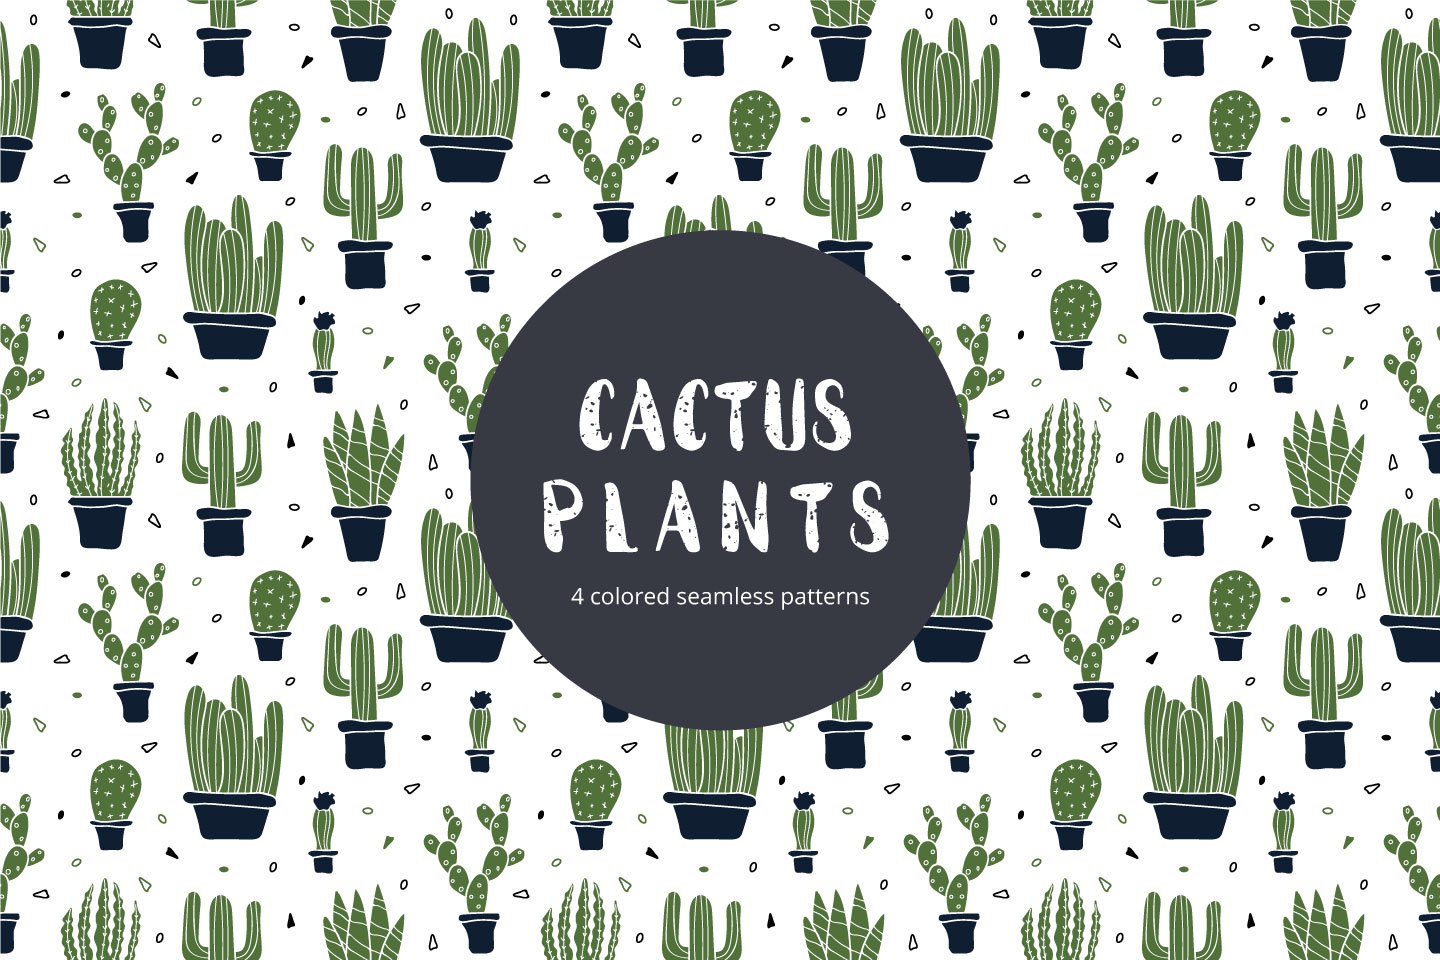 Free Vector, Pattern of several cactus